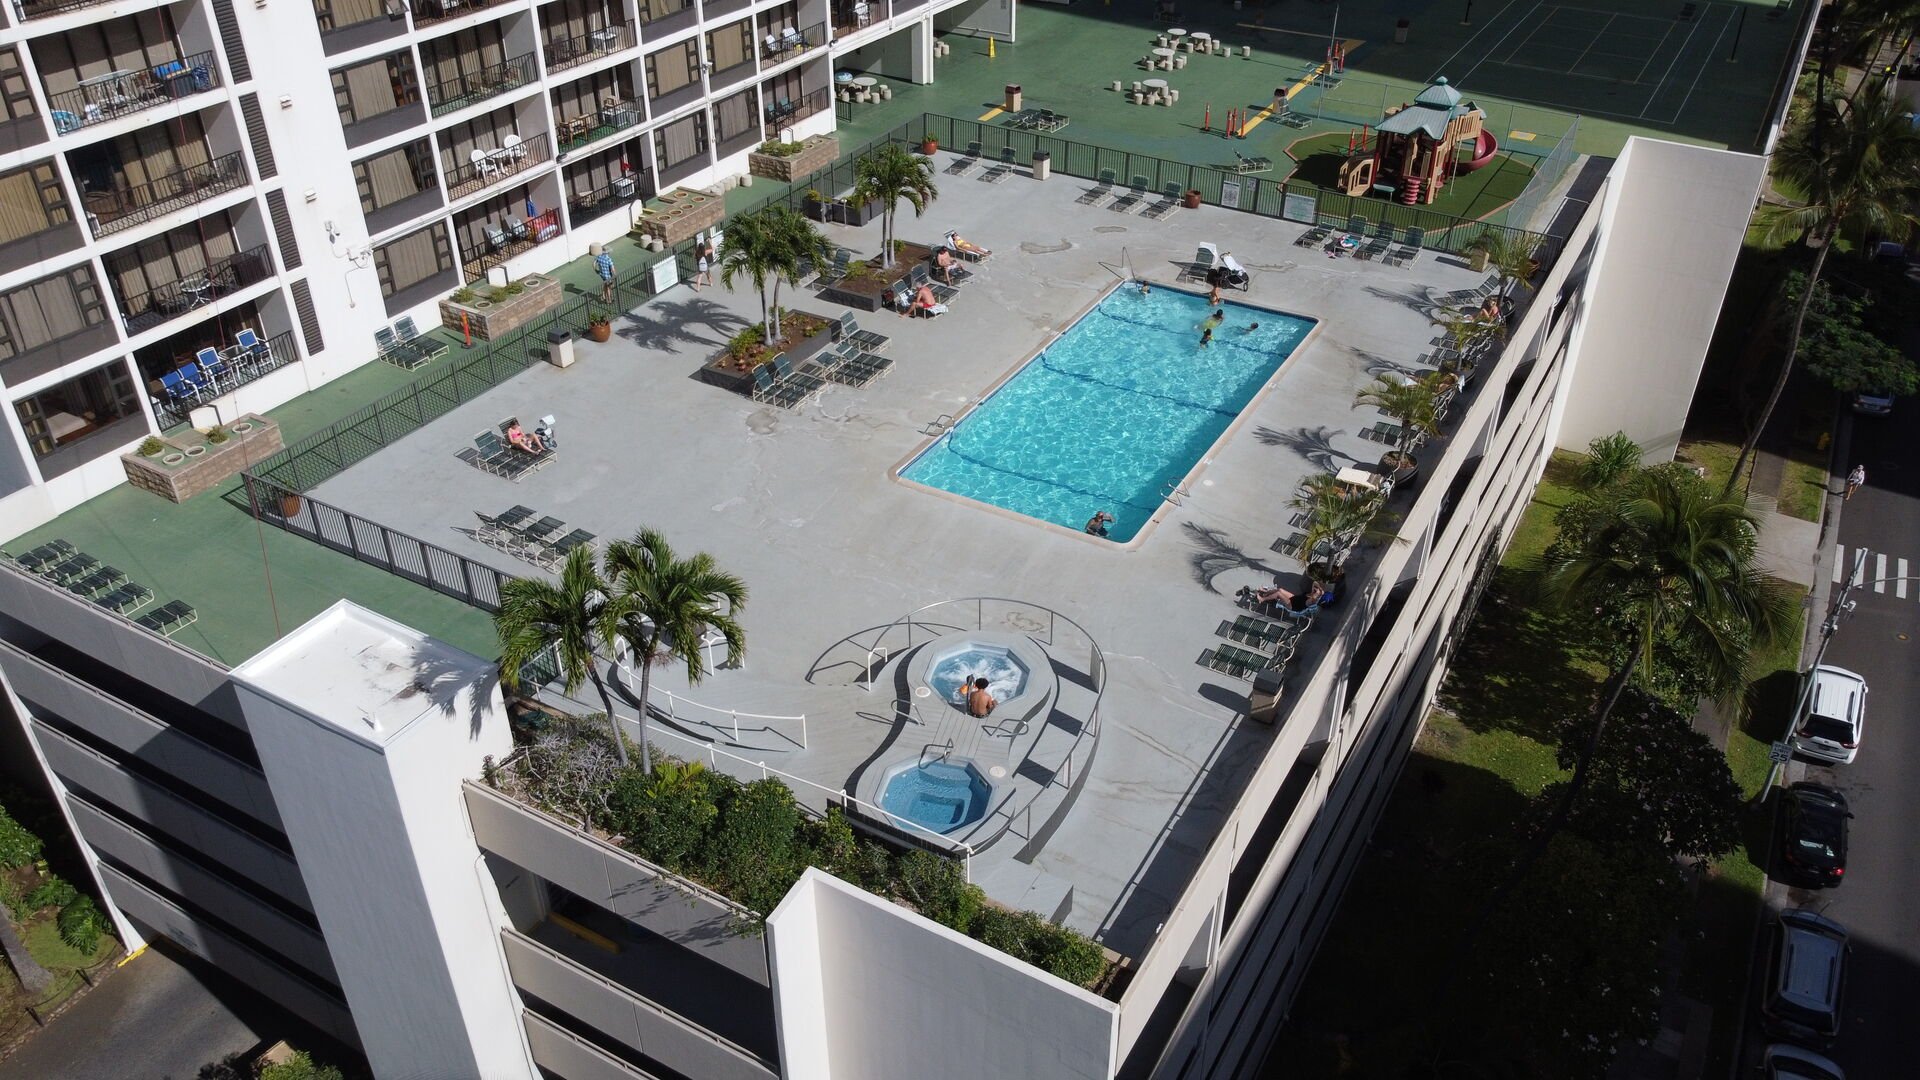 Swimming pool recreation deck on the 6th floor